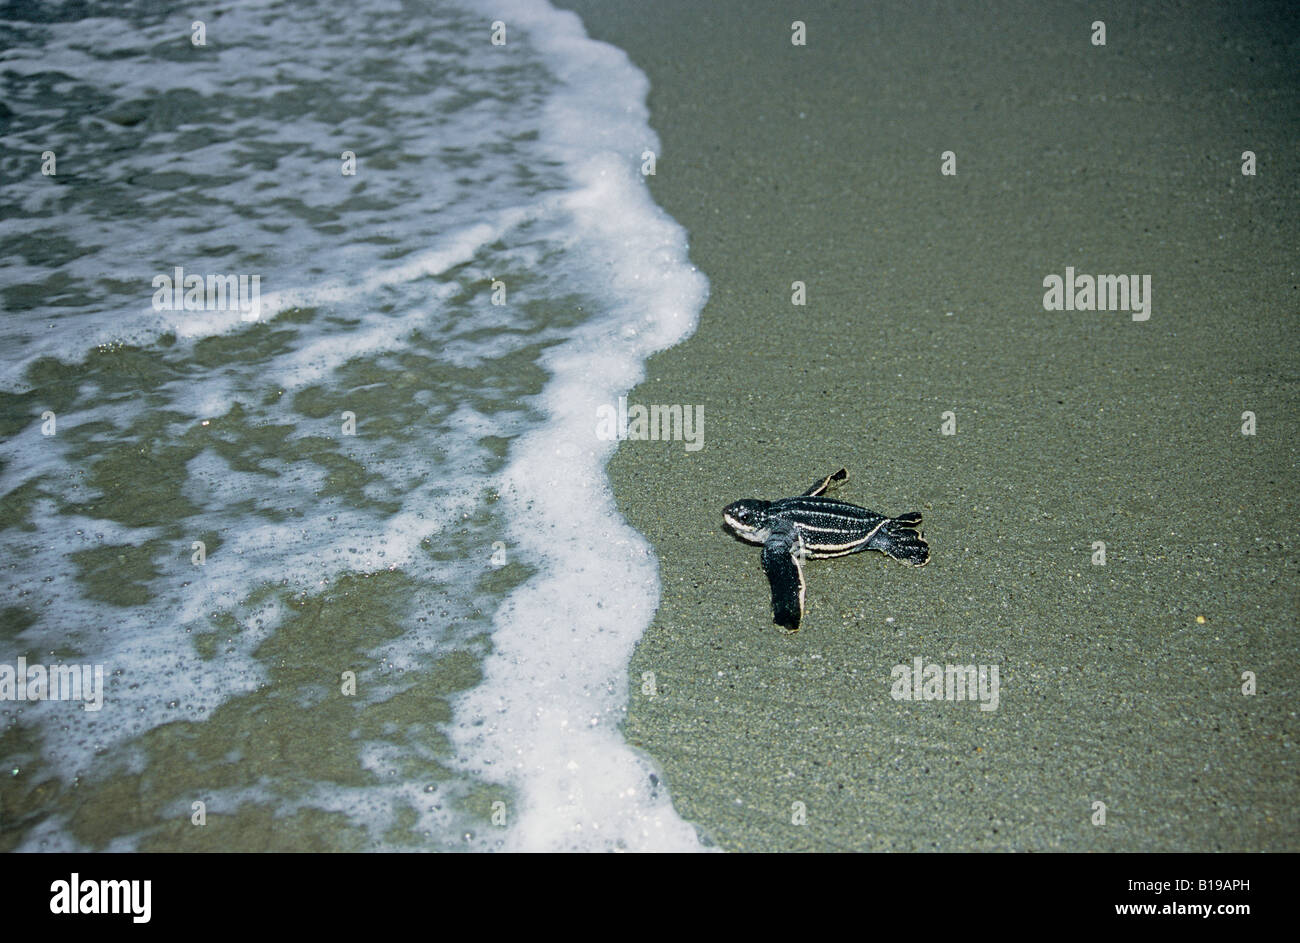 Newly hatched leatherback sea turtle (Dermochelys coriacea) escaping to the sea, Trinidad. Stock Photo